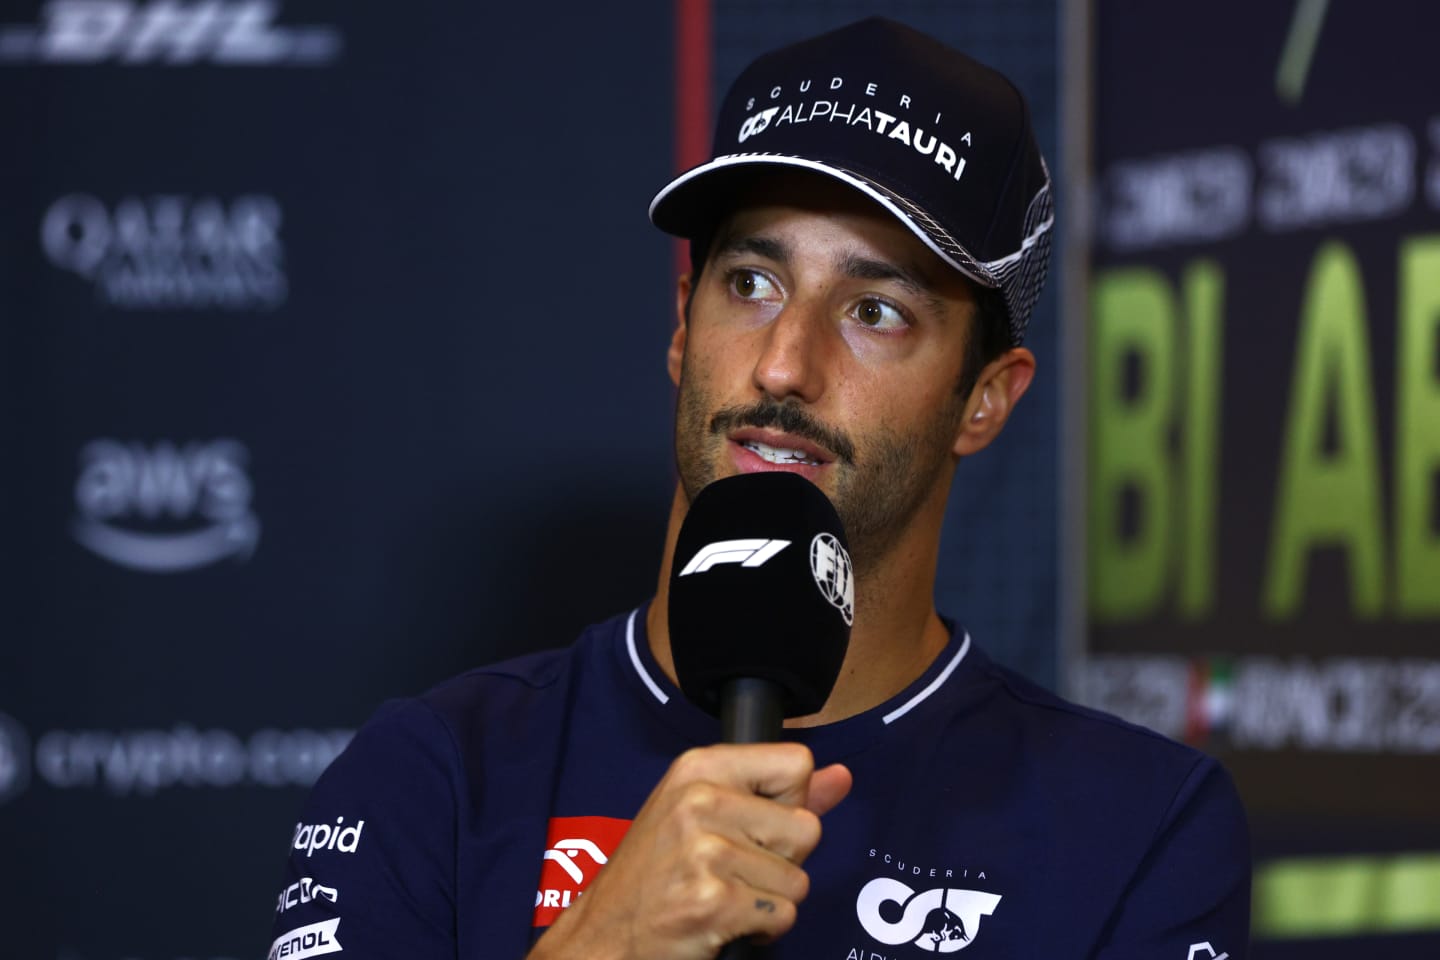 ABU DHABI, UNITED ARAB EMIRATES - NOVEMBER 23: Daniel Ricciardo of Australia and Scuderia AlphaTauri attends the Drivers Press Conference during previews ahead of the F1 Grand Prix of Abu Dhabi at Yas Marina Circuit on November 23, 2023 in Abu Dhabi, United Arab Emirates. (Photo by Clive Rose/Getty Images)